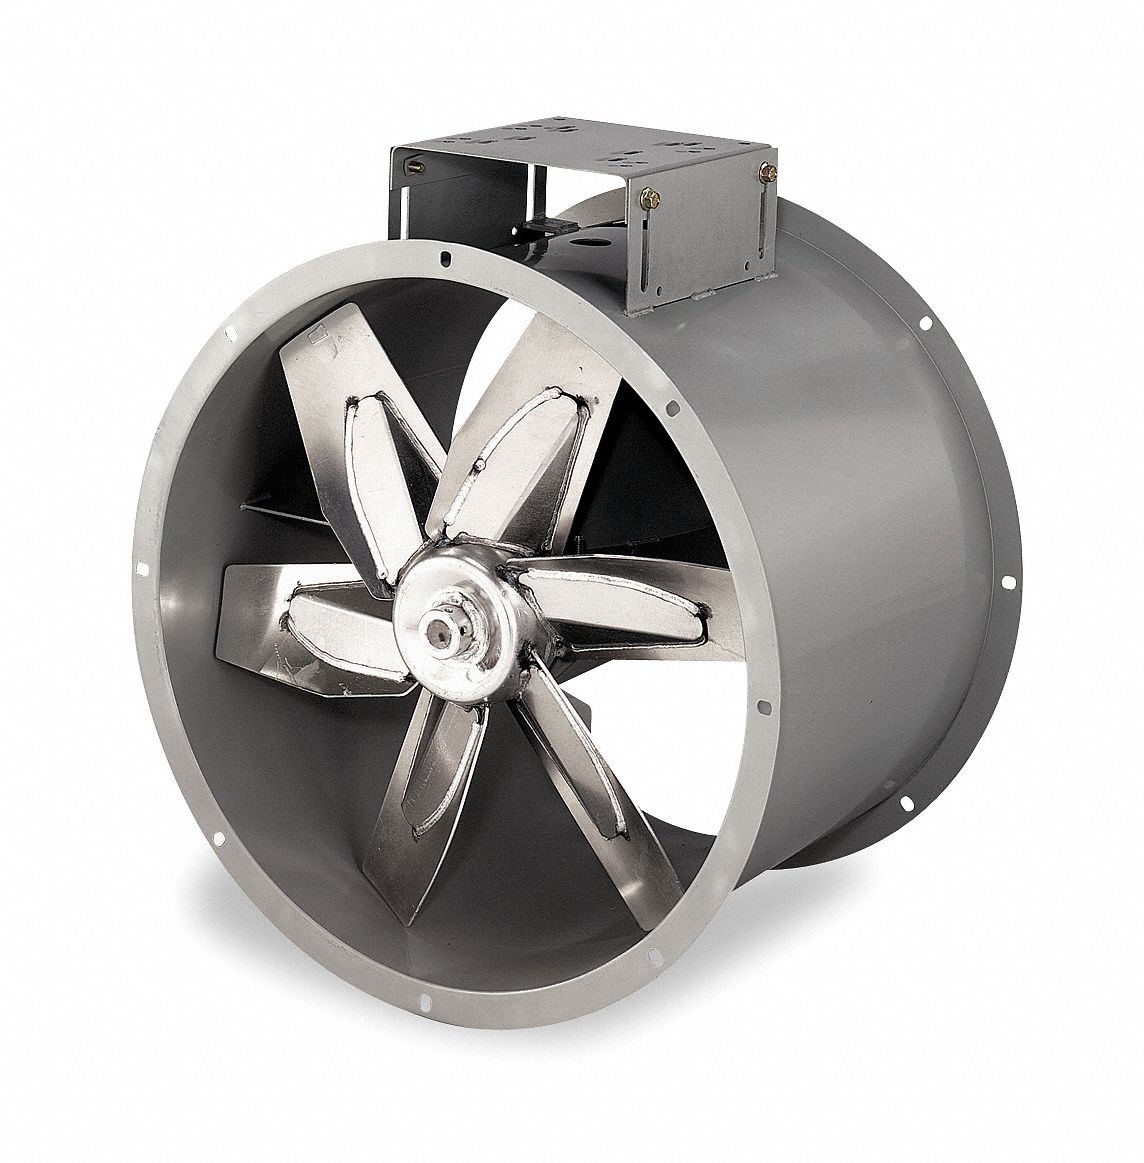 DAYTON Tubeaxial Fan: Clean Air, 30 in Blade, 14,040 cfm @ 0.000 in SP,  208-230/460V AC, 3 Phase